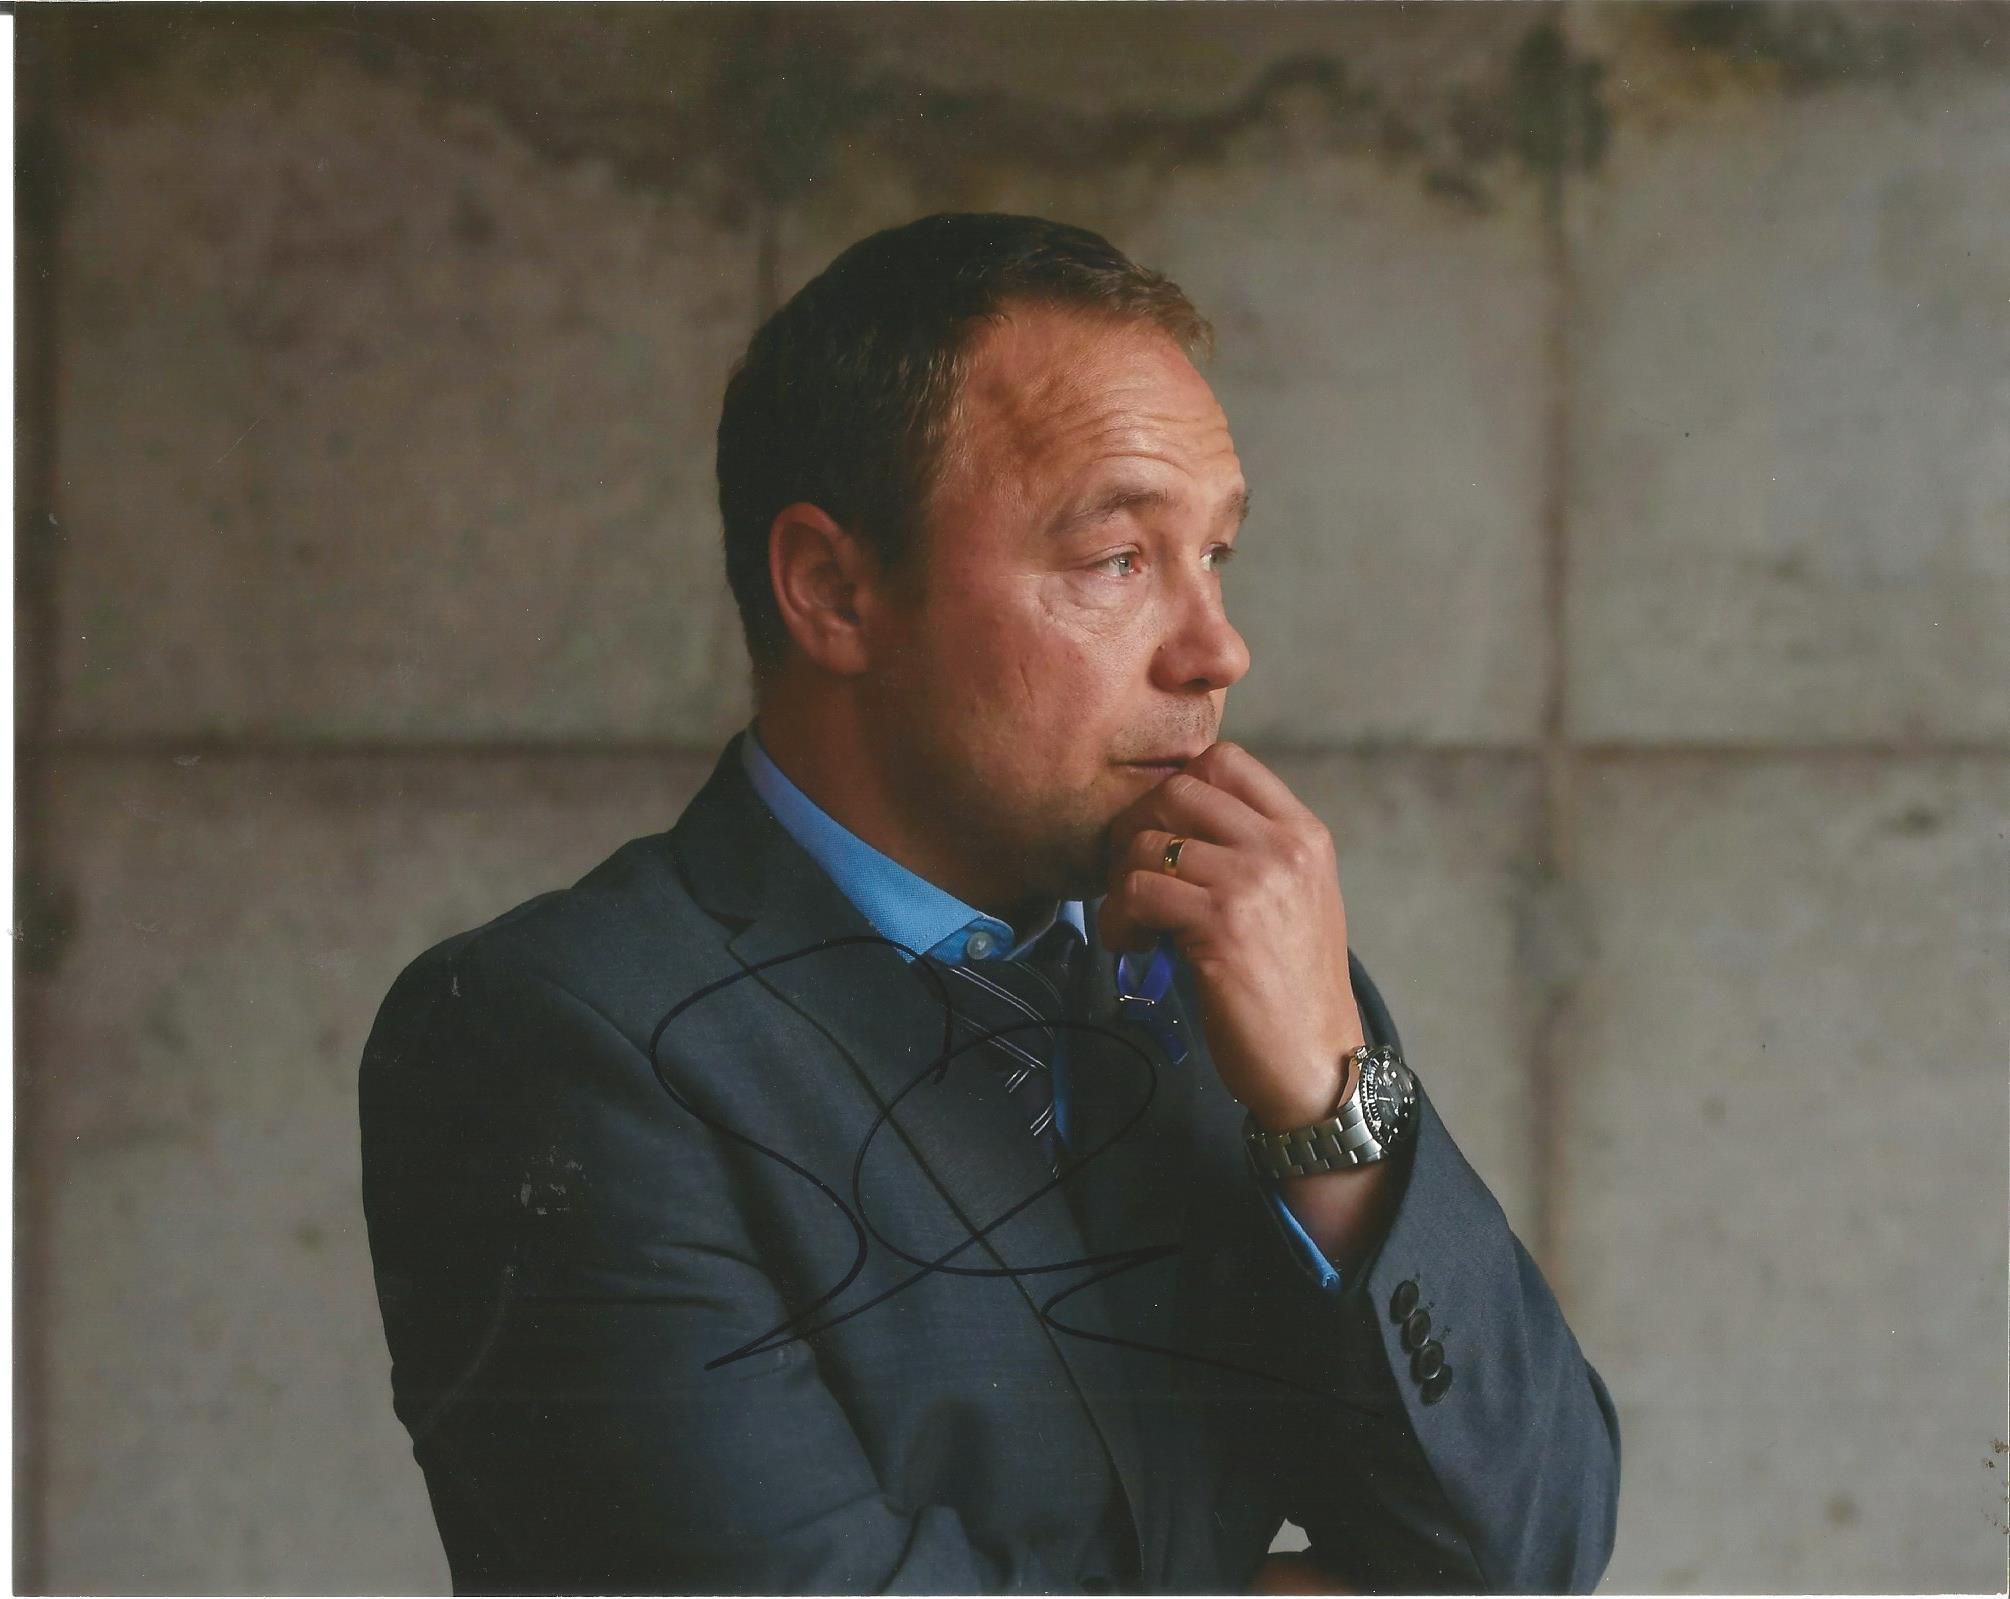 Stephen Graham Actor Signed 8x10 Photo. Good Condition. All signed pieces come with a Certificate of